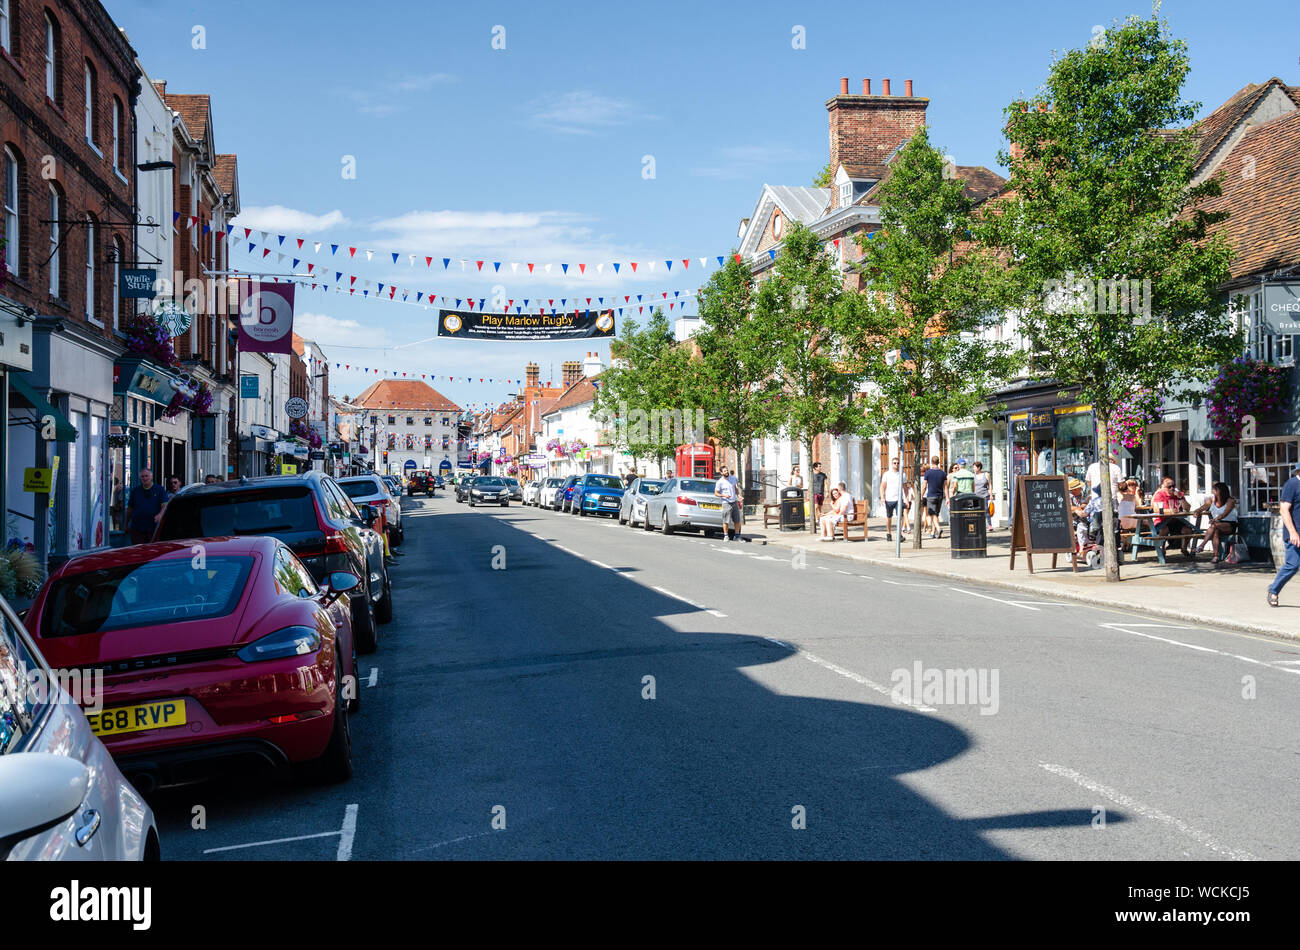 A view down The High Street in Marlow, Buckinghamshire, UK Stock Photo